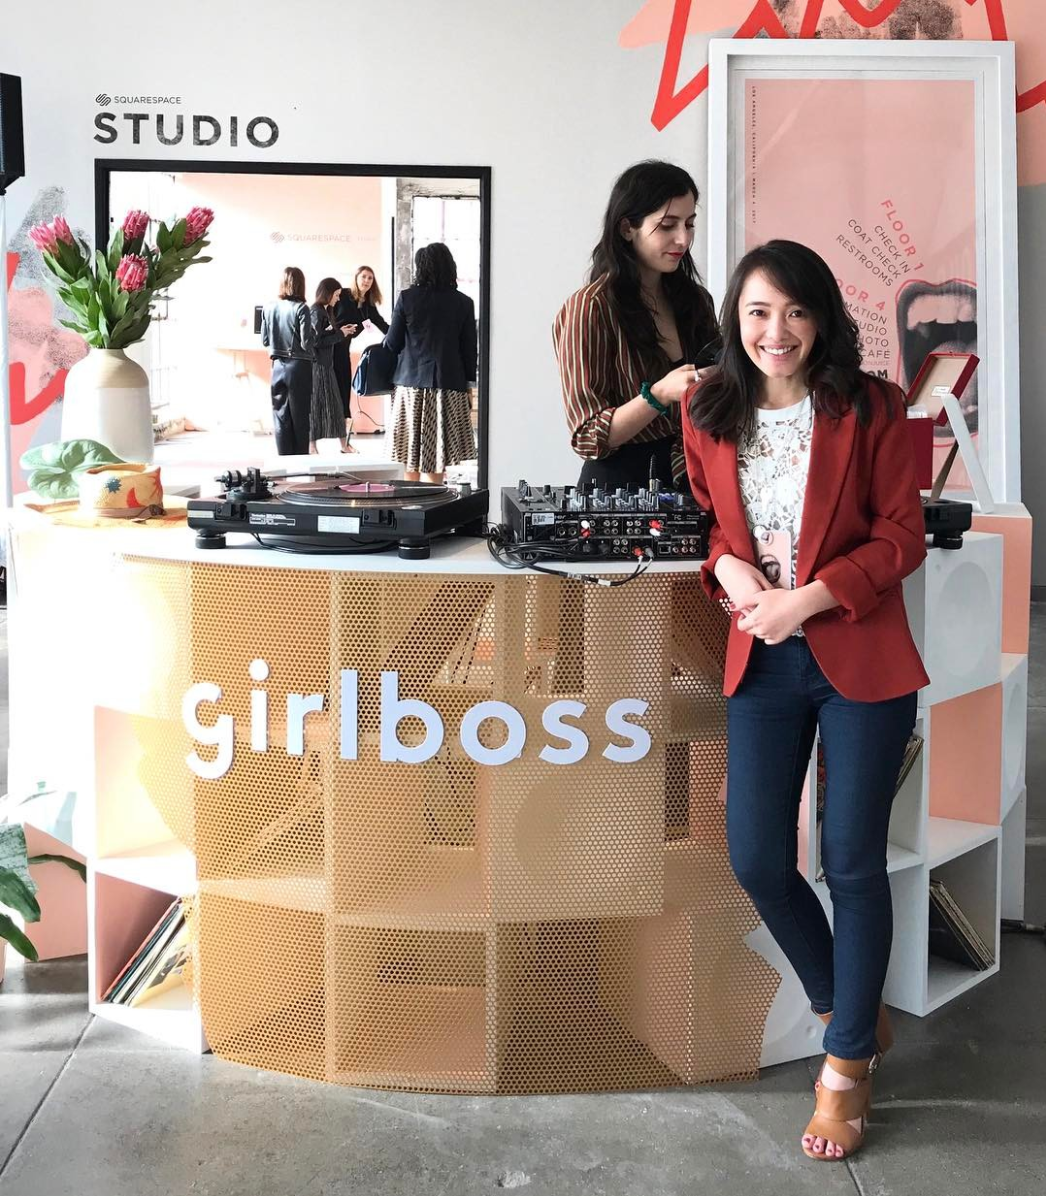 At this year’s Girlboss Rally in Los Angeles sharing with fellow female entrepreneurs InHerShoes’s mission.